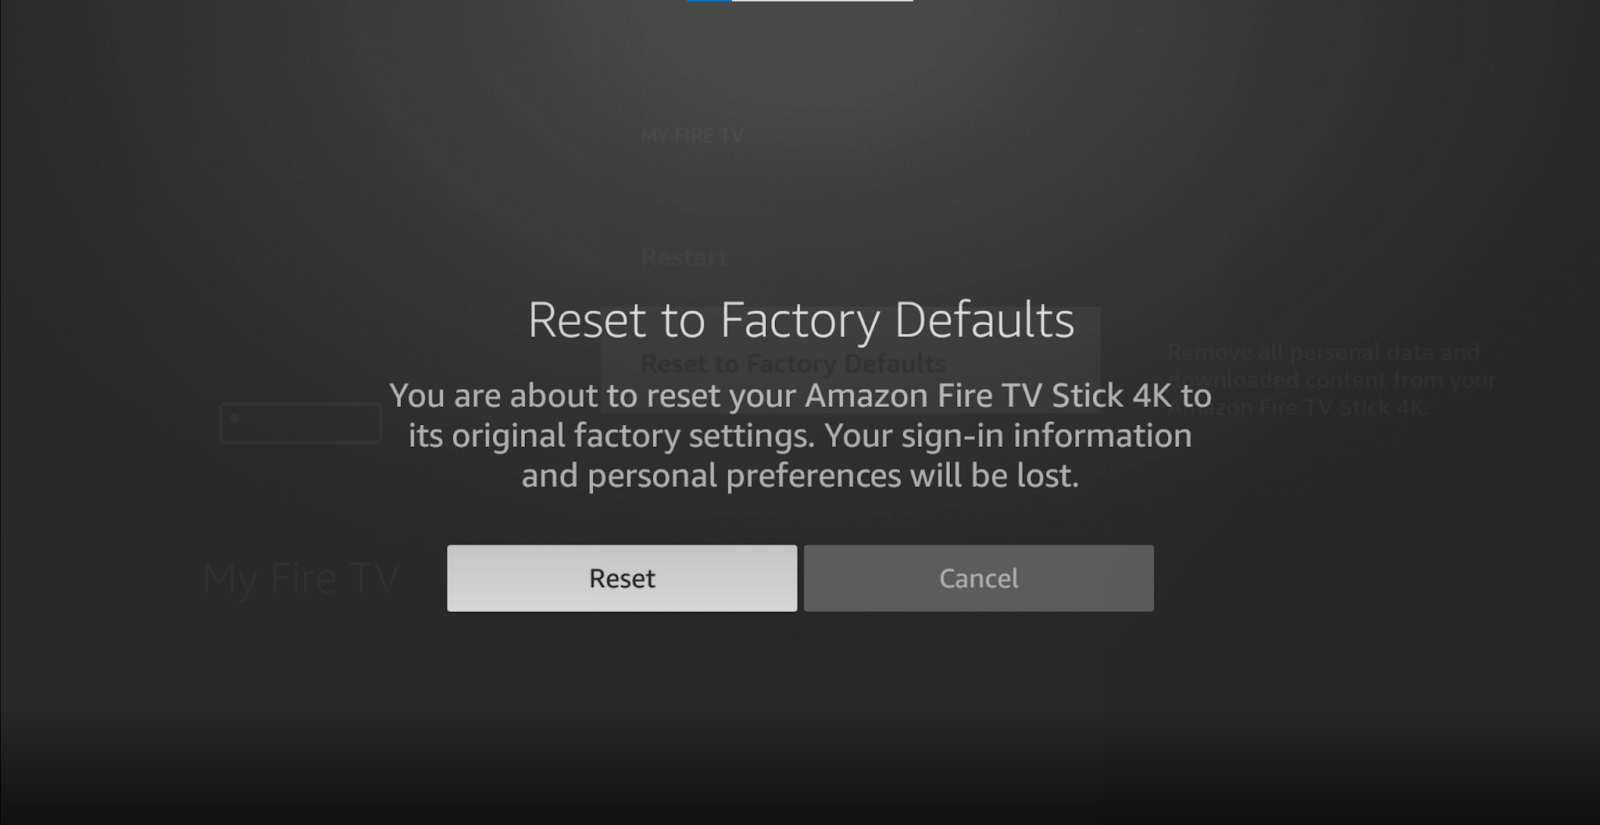 Confirm reset to factory defaults on Amazon Firestick